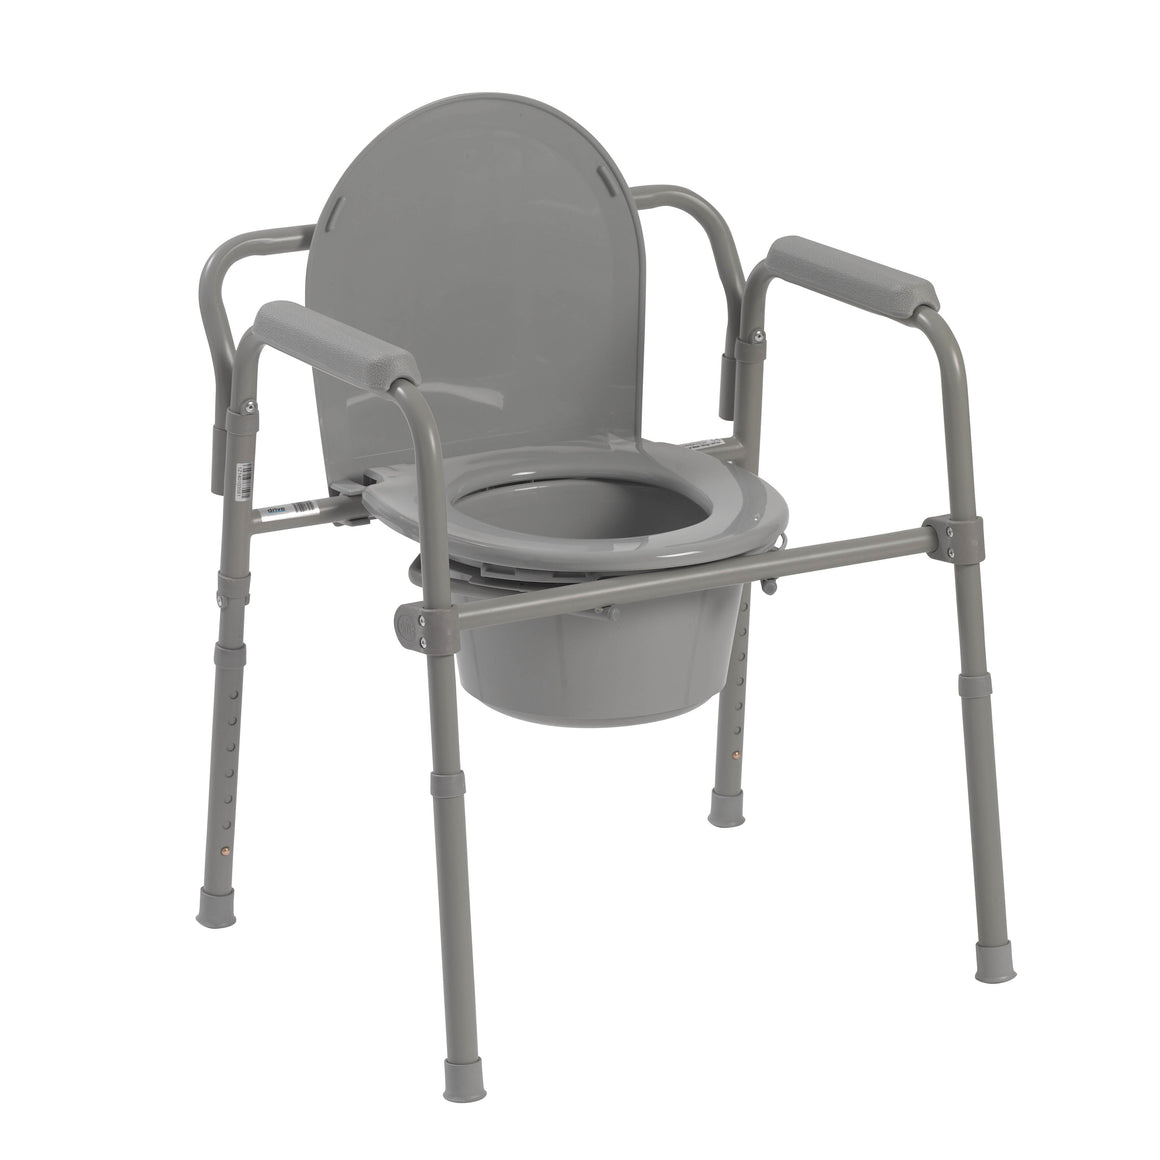 Folding Steel Commode by Drive Medical #11148N4 - fhmedicalservices